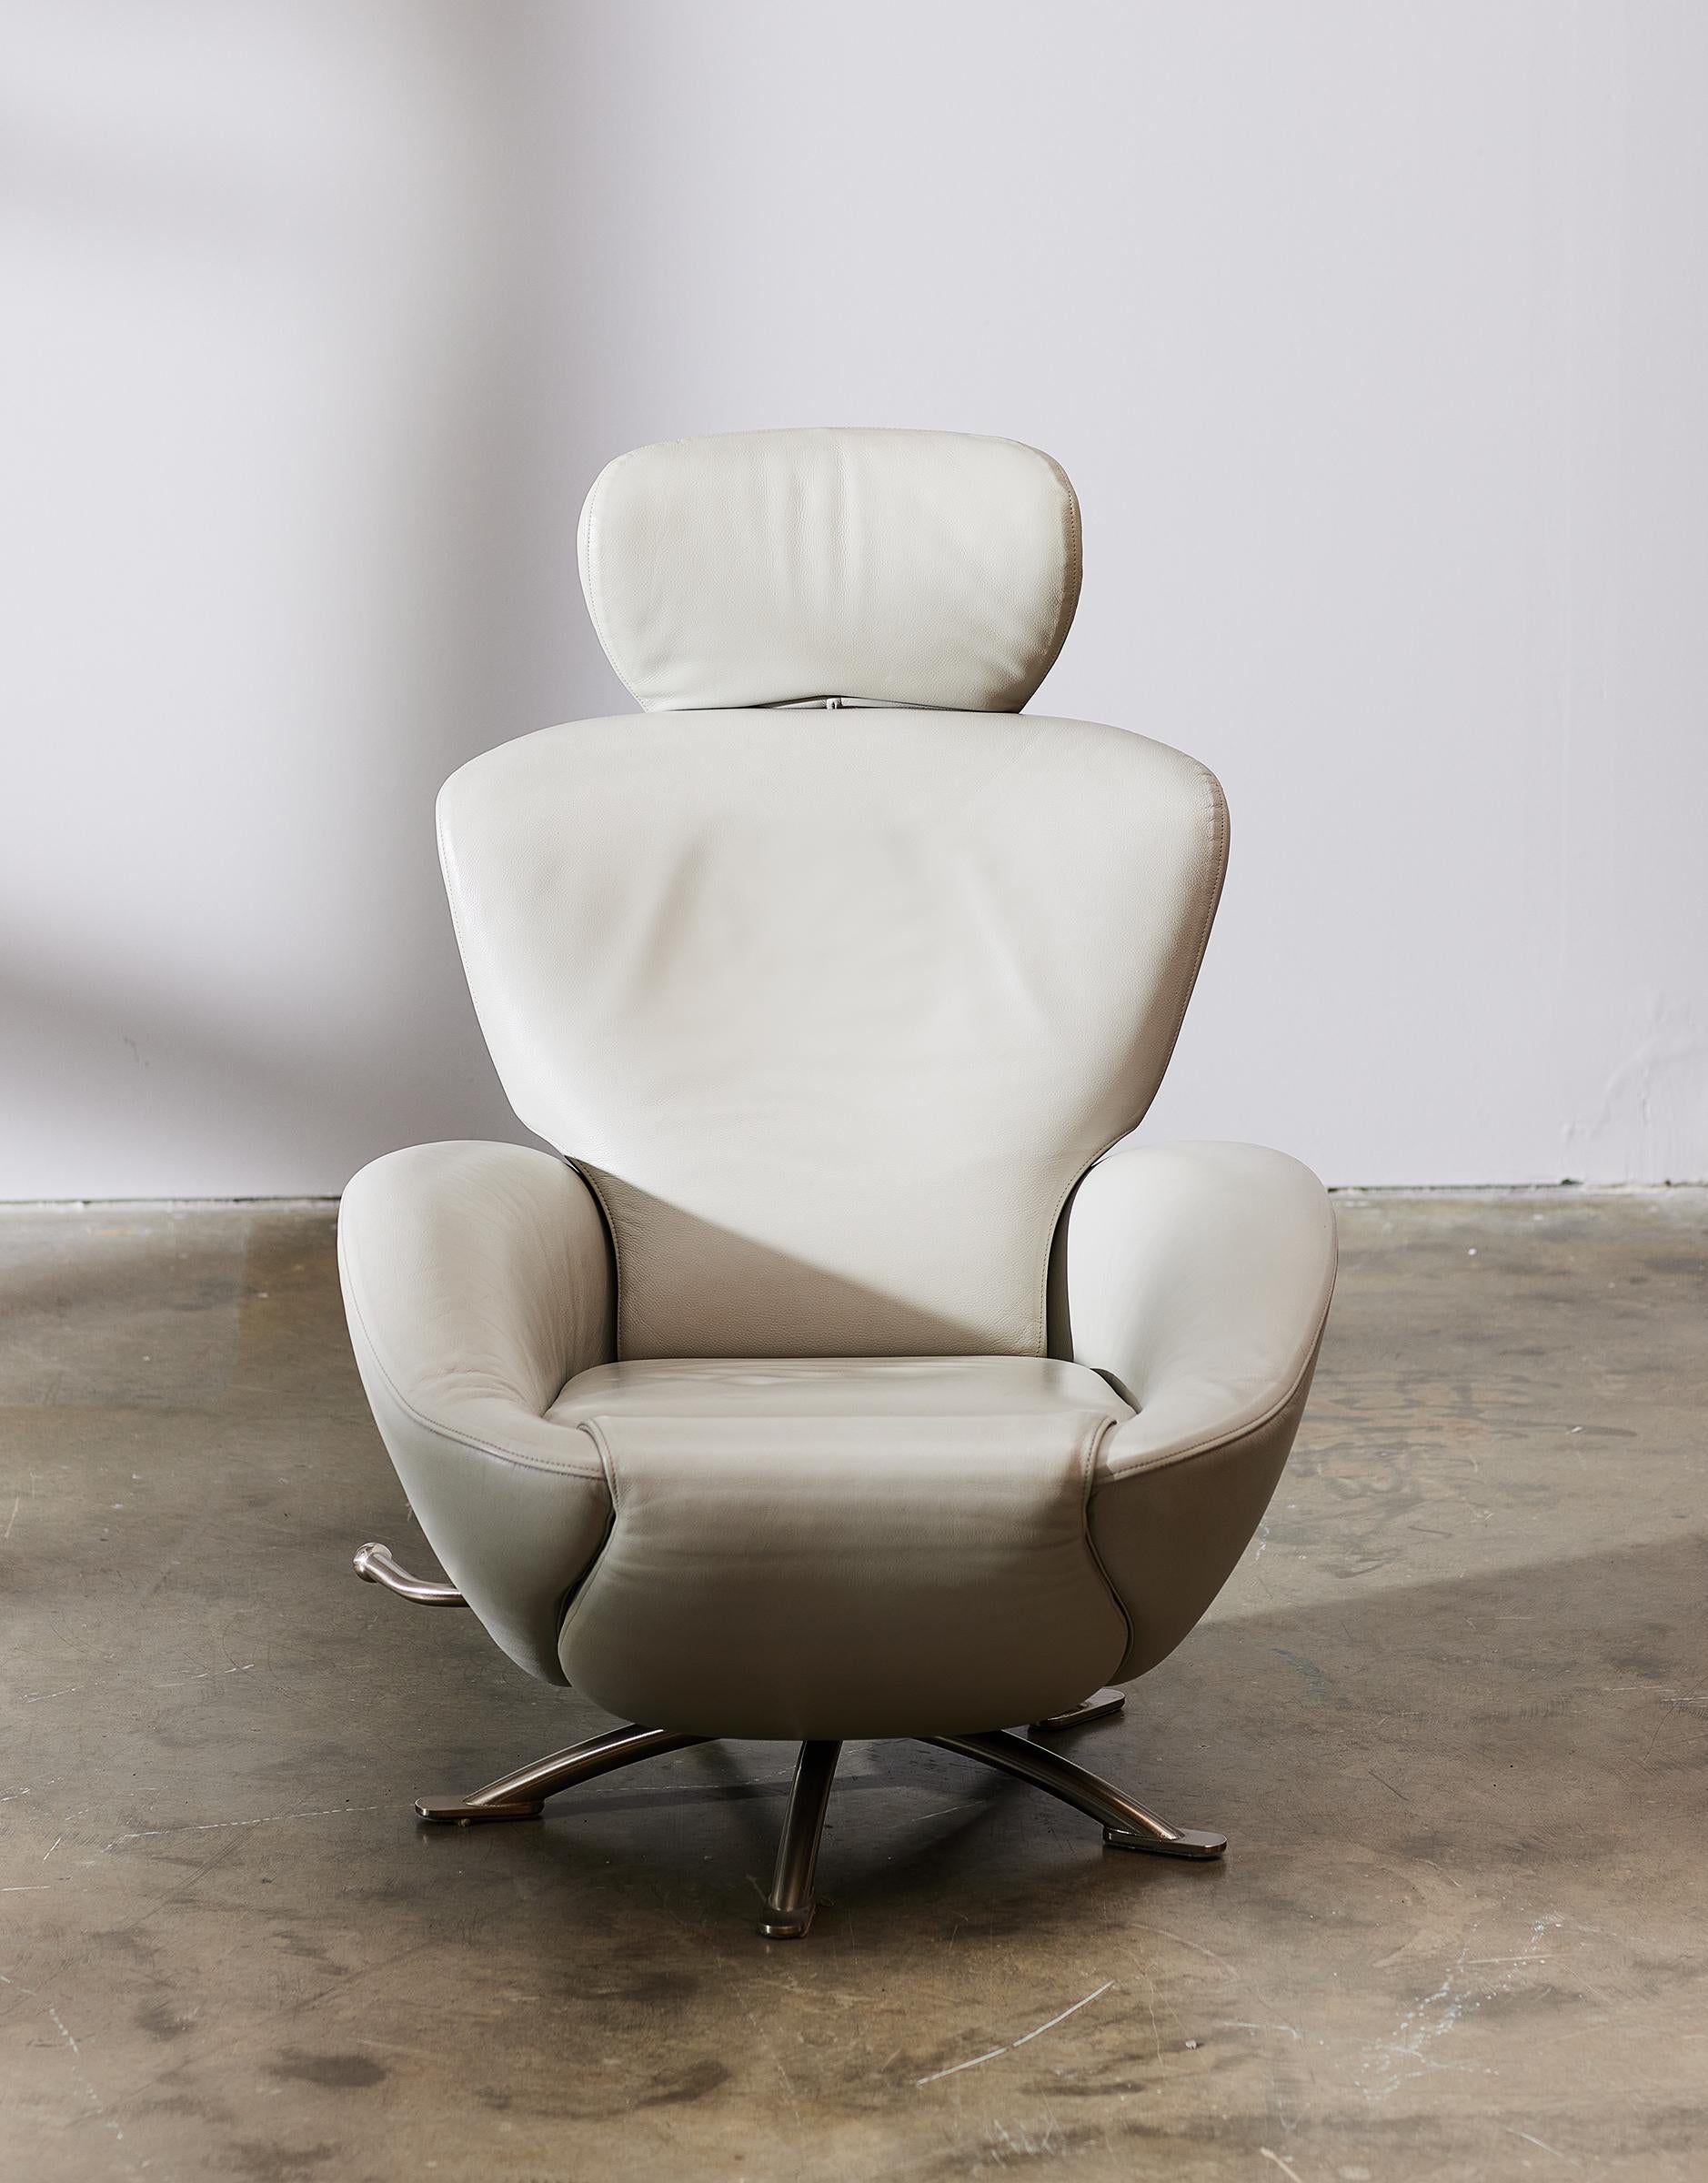 A versatile design piece with contemporary lines, the DODO recliner was designed by Japanese designer Toshiyuki Kita for Cassina in 2000.
From a reading chair to a chaise longue, Dodo fits perfectly into any contemporary space. Its swivel seat on a